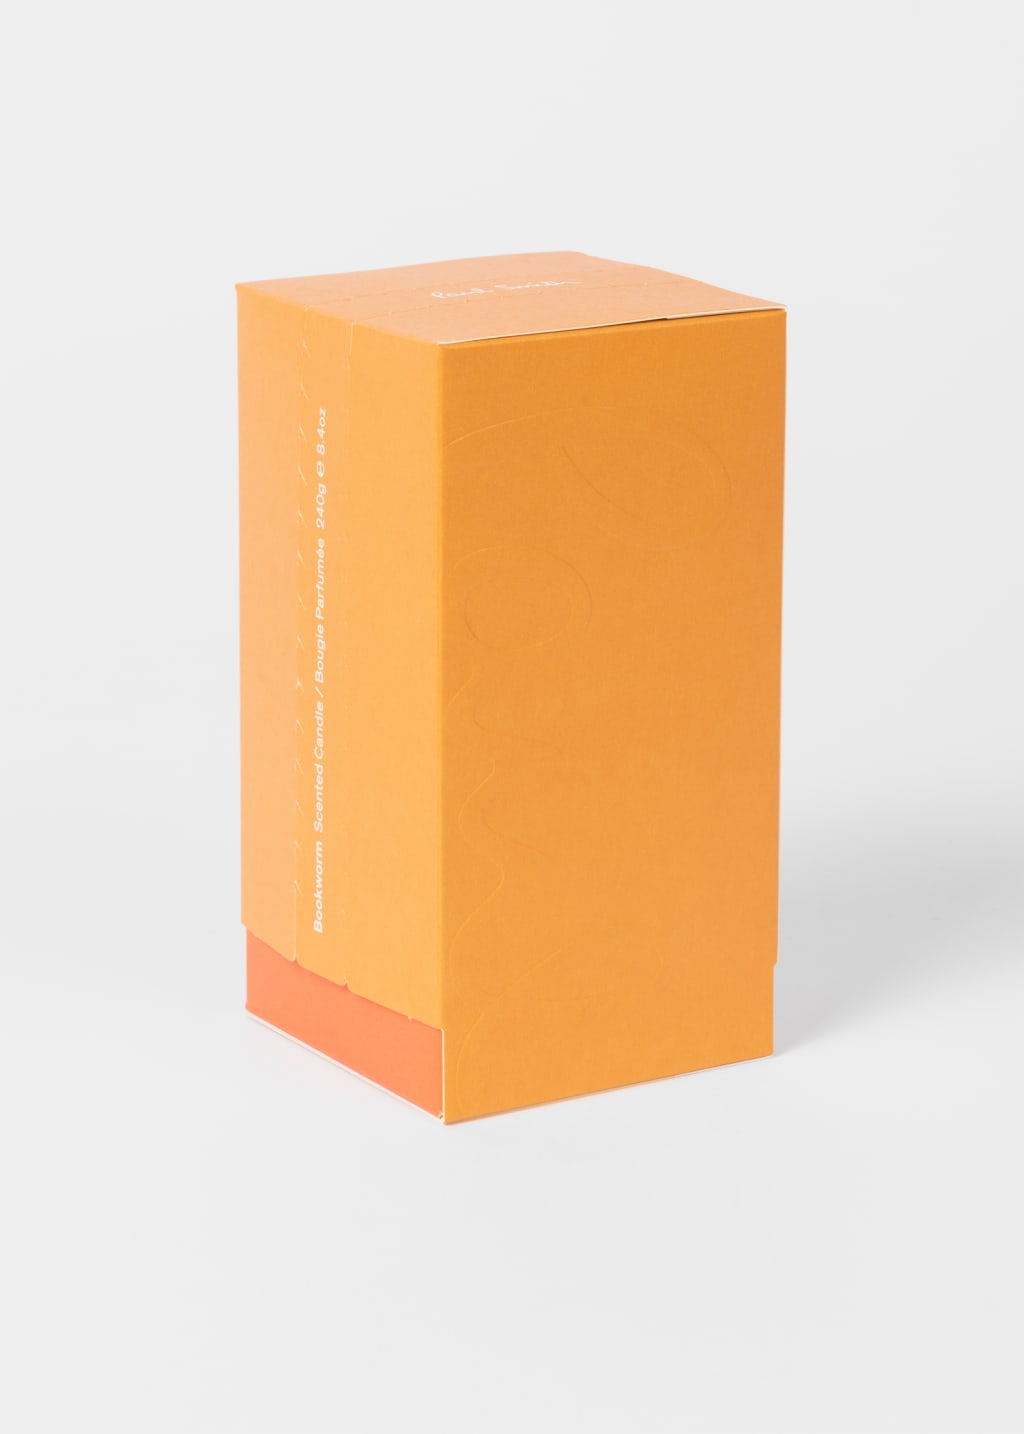 Product View - Bookworm Scented Candle, 240g by Paul Smith